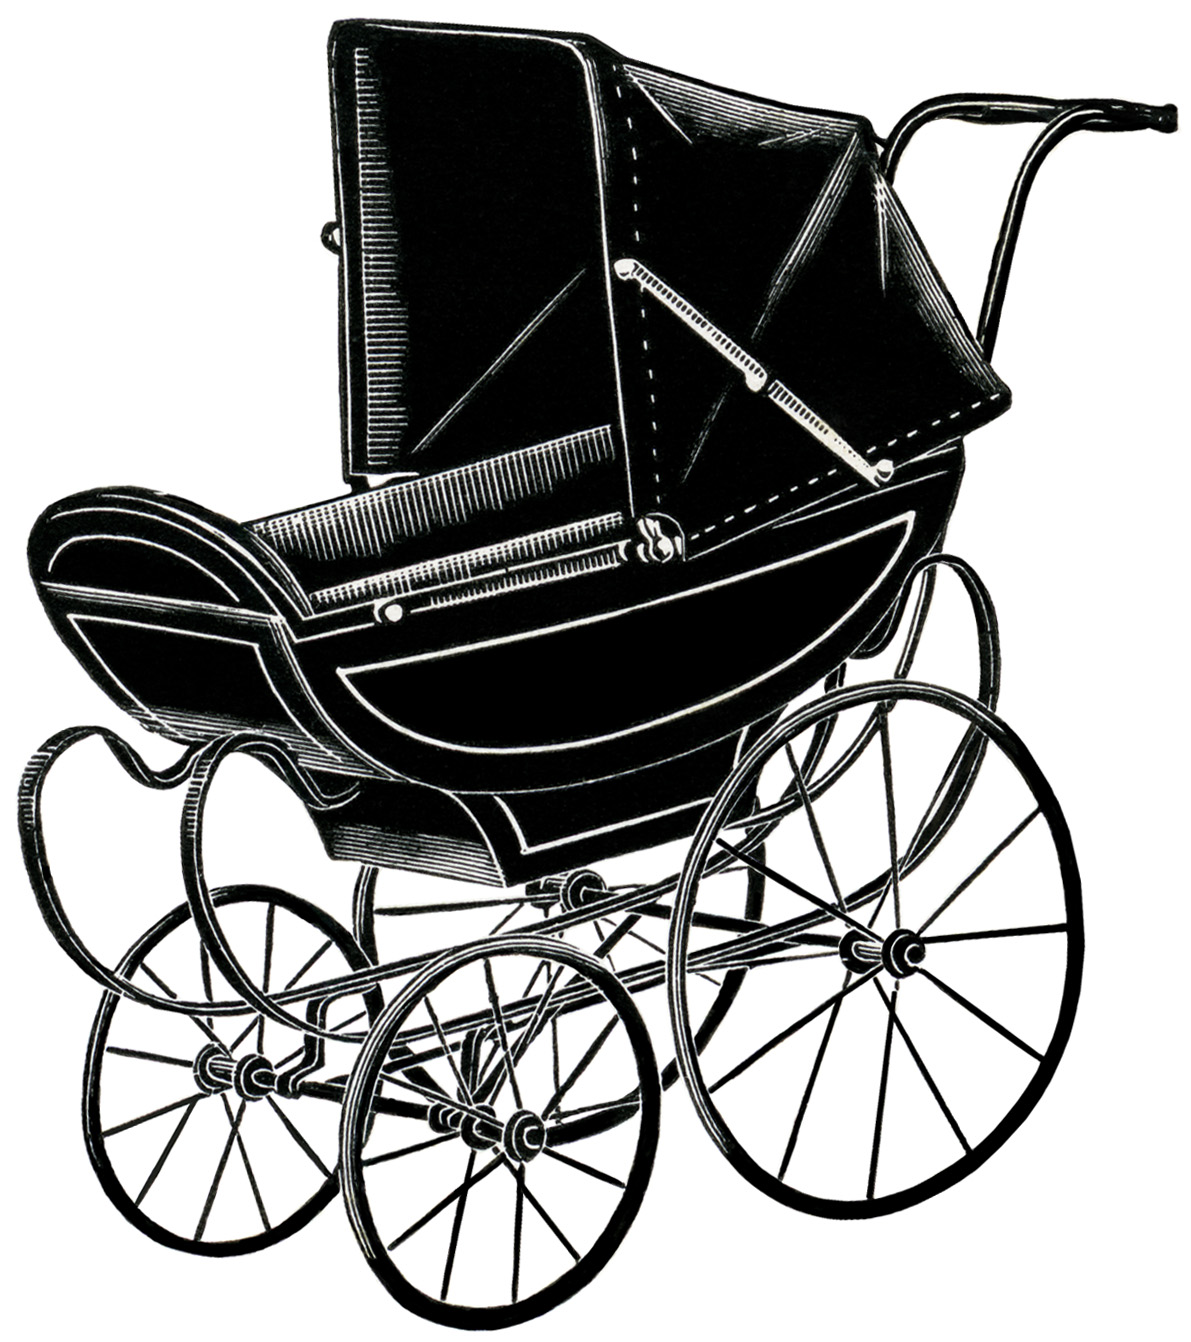 free vintage clipart doll pram, doll carriage, antique baby carriage, vintage doll perambulator, free vintage image, digital image baby buggy, baby carriage illustration